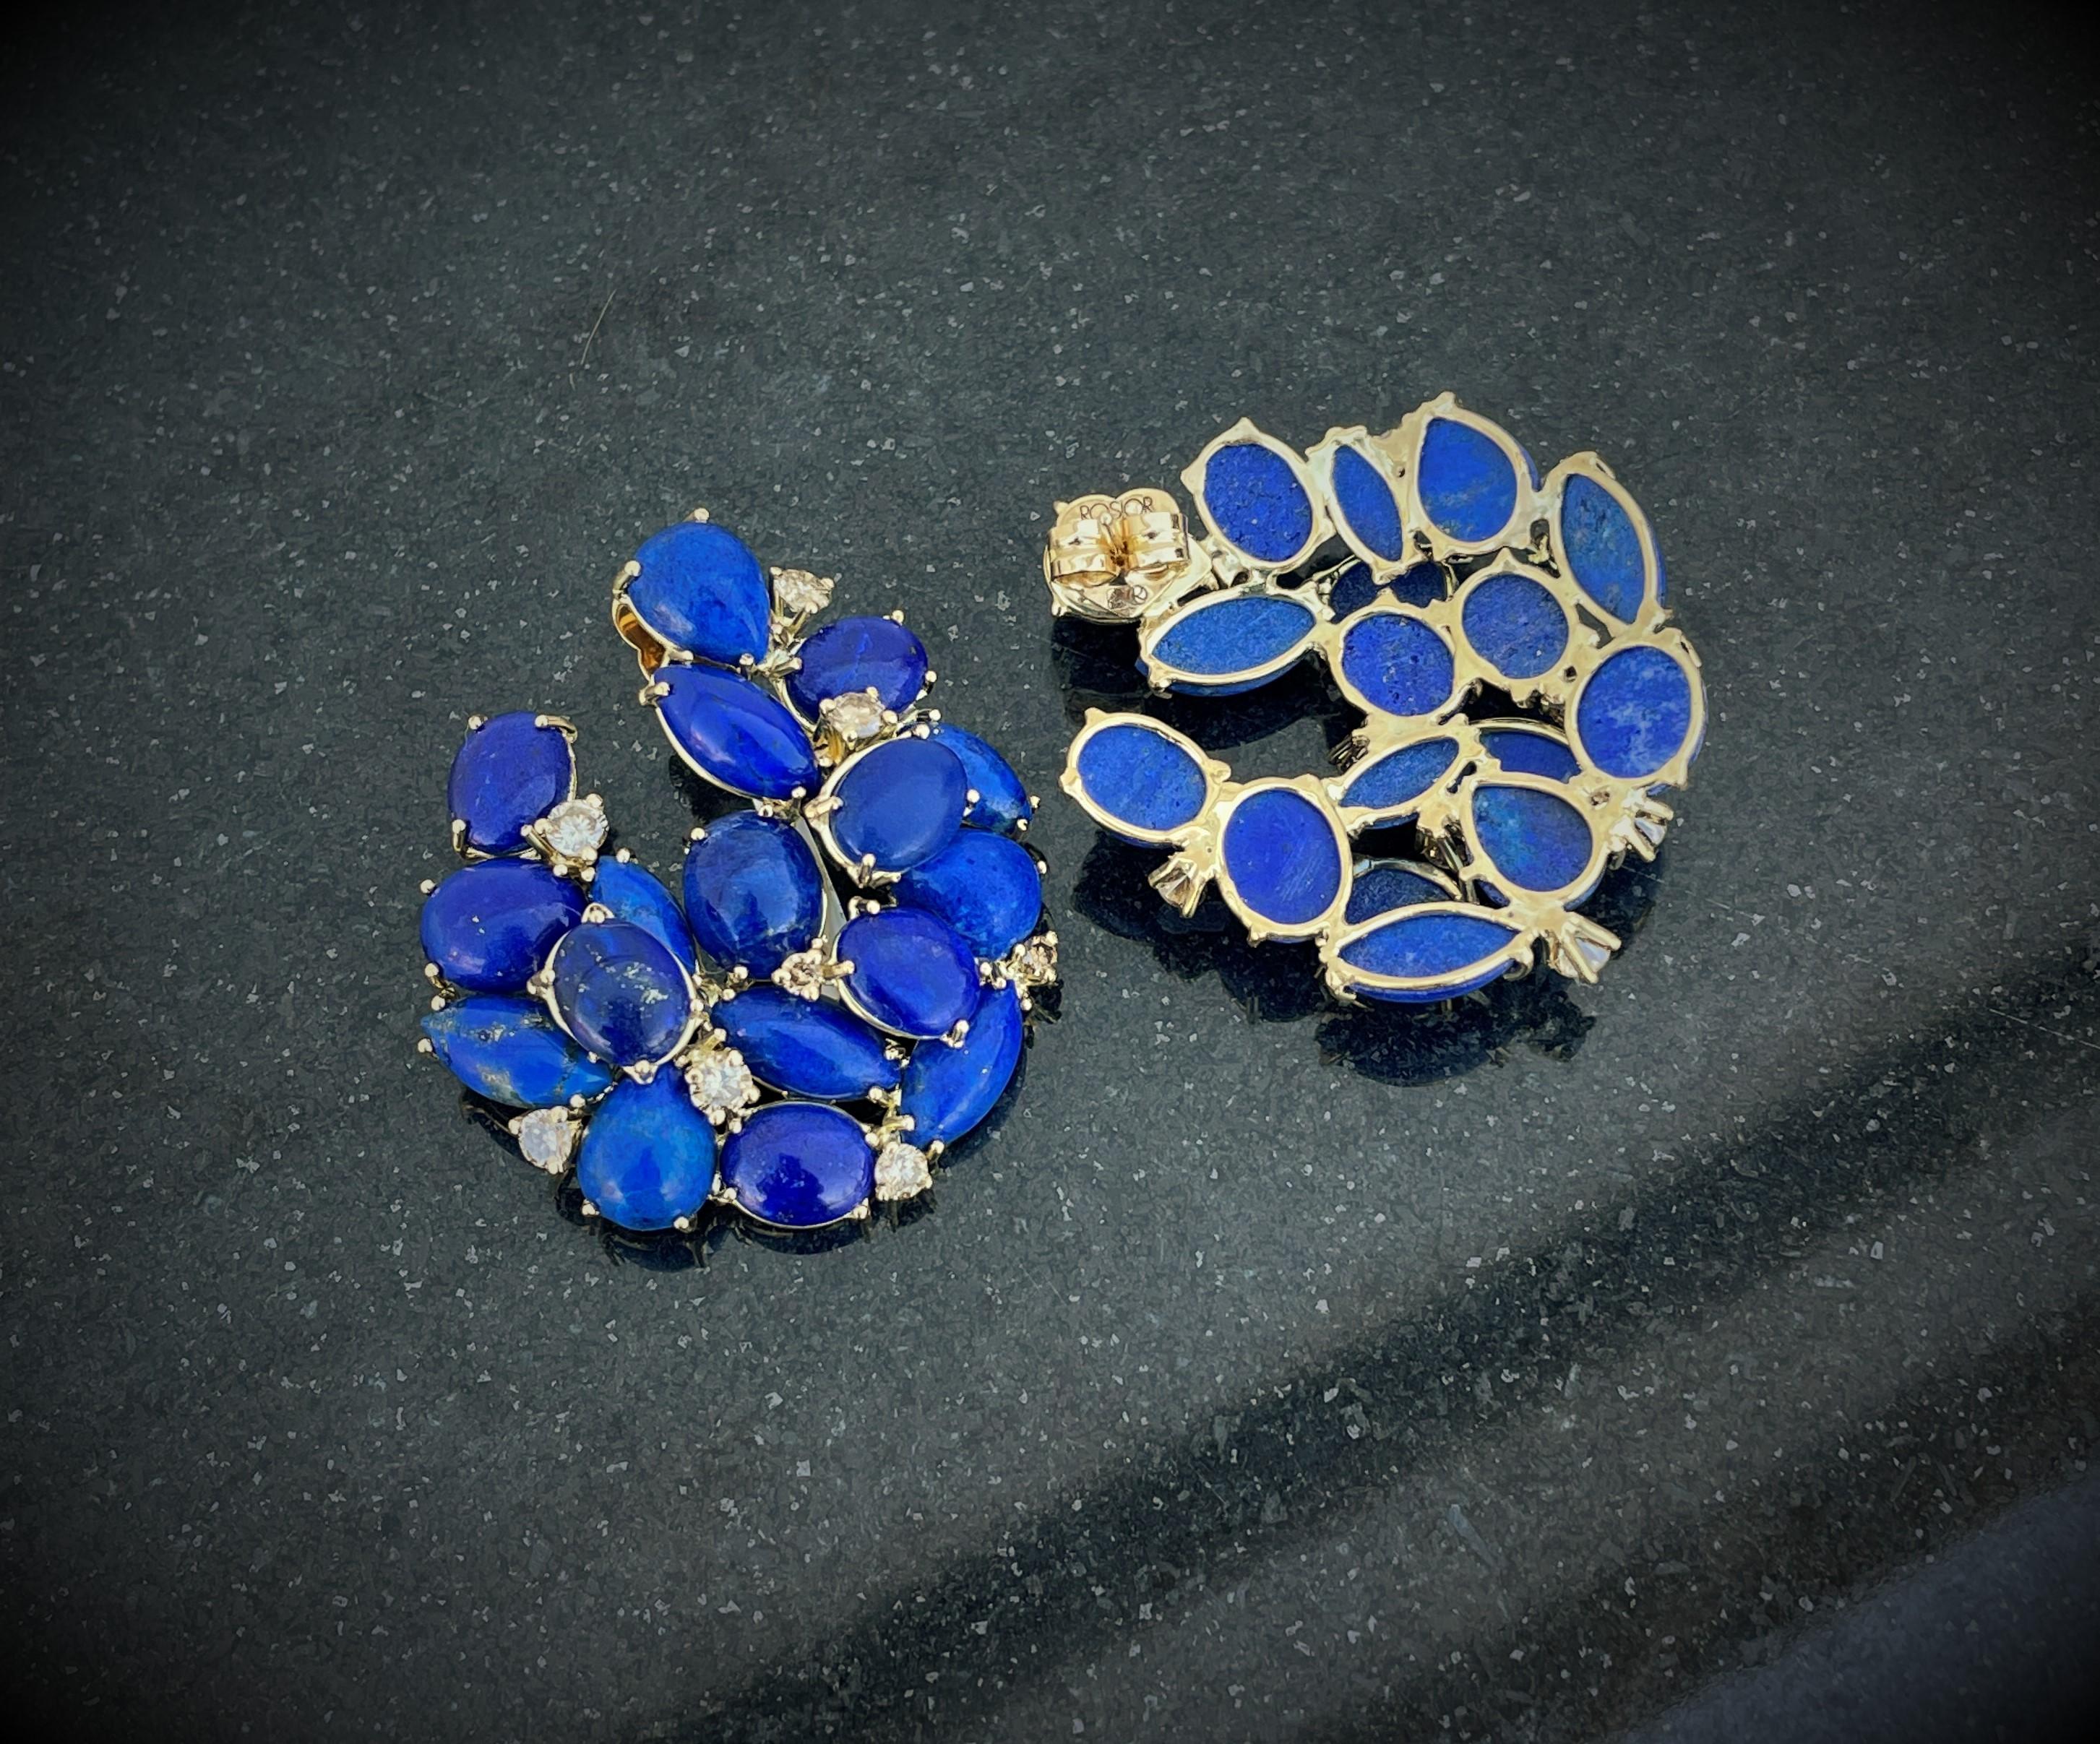 Women's or Men's Rosior one-off earrings in Lapis Lazuli and Diamond Set in Yellow Gold